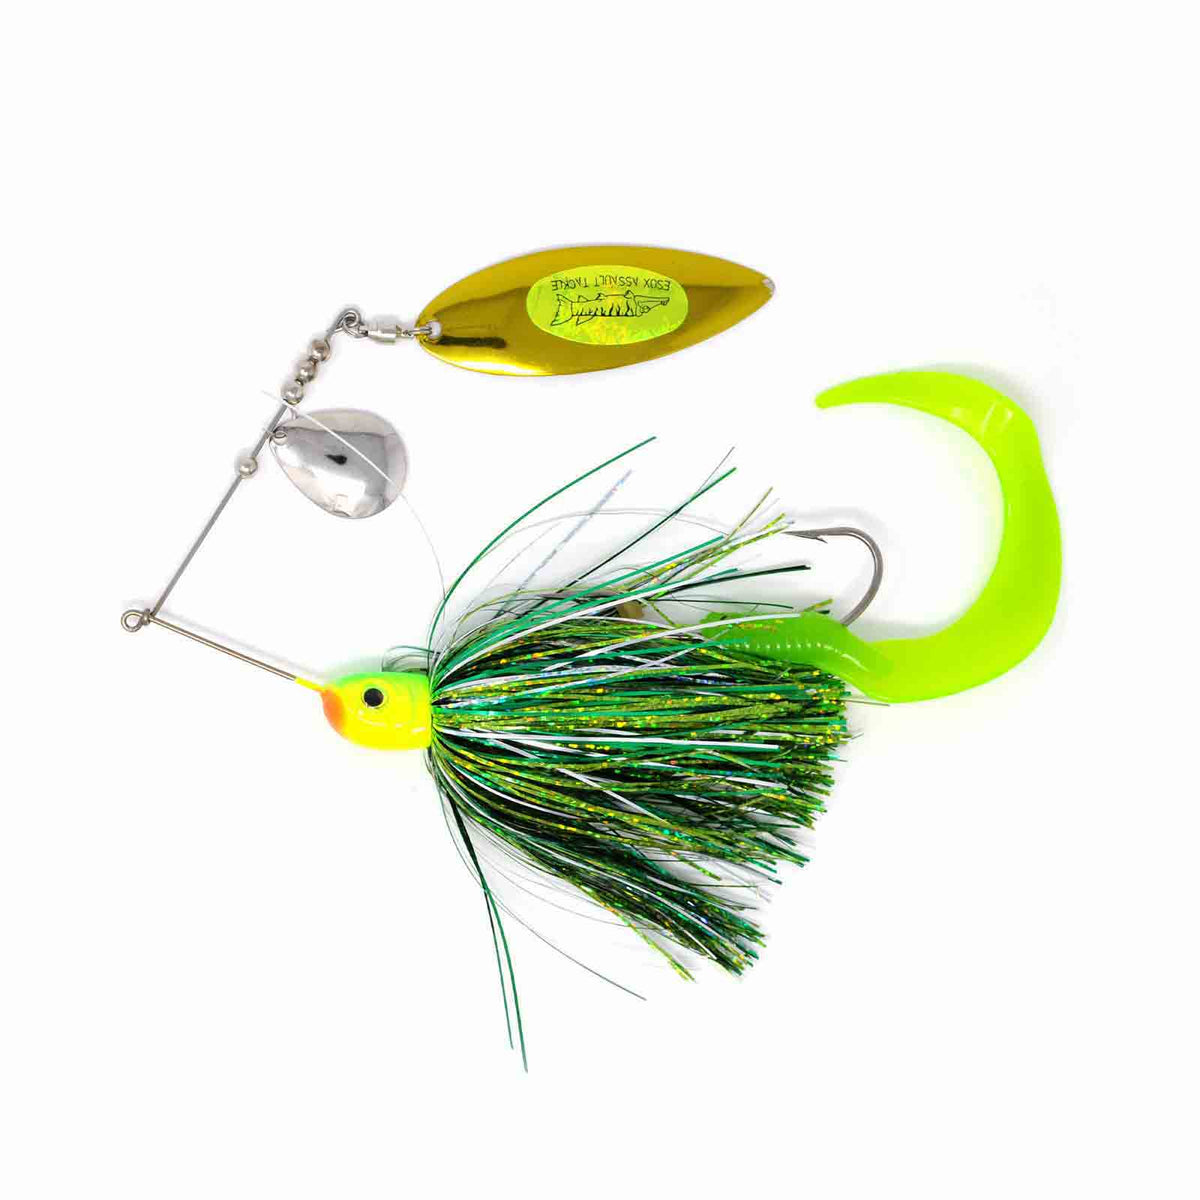 View of Spinnerbaits Esox Assault Spinnerbait Willow 1.5oz Gang Green available at EZOKO Pike and Musky Shop